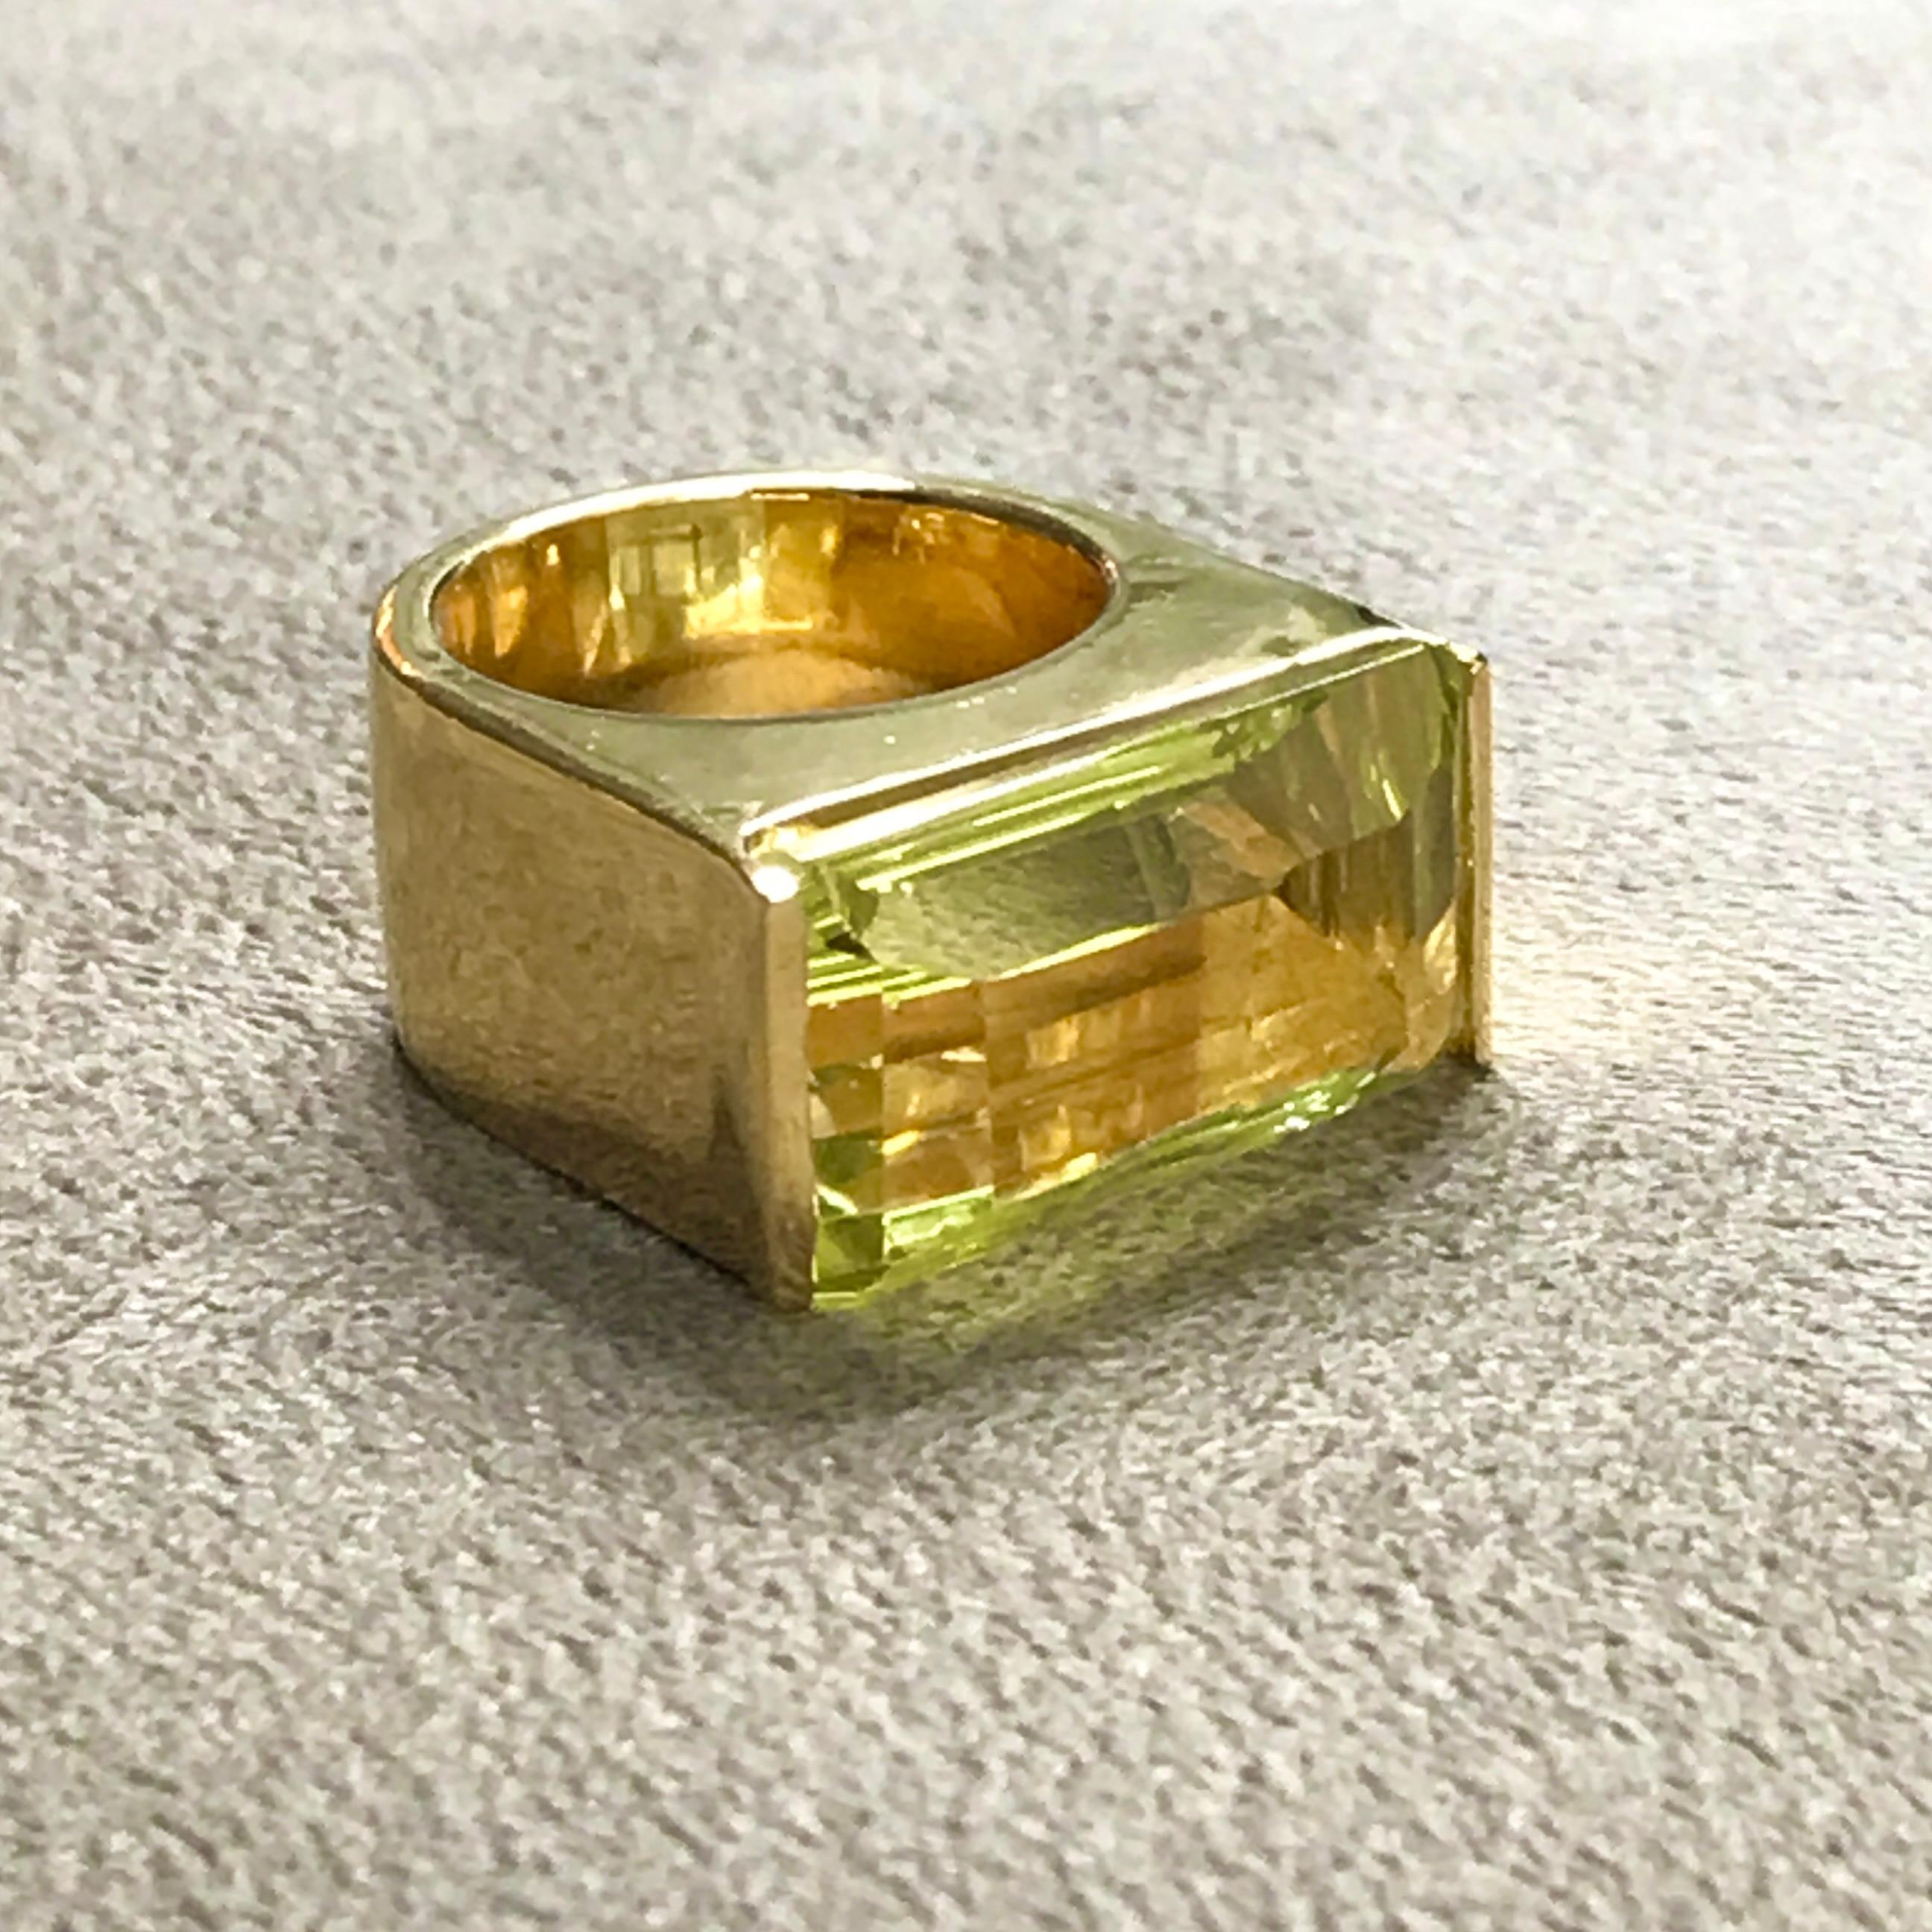 An extremely simple, yet stylish ring focusing on a beautifully cut Lemon Quartz baguette.

The stone, which has a lovely even & lustrous colour is mounted in a very simple setting designed to support and focus the stone.

Despite its' simplicity,